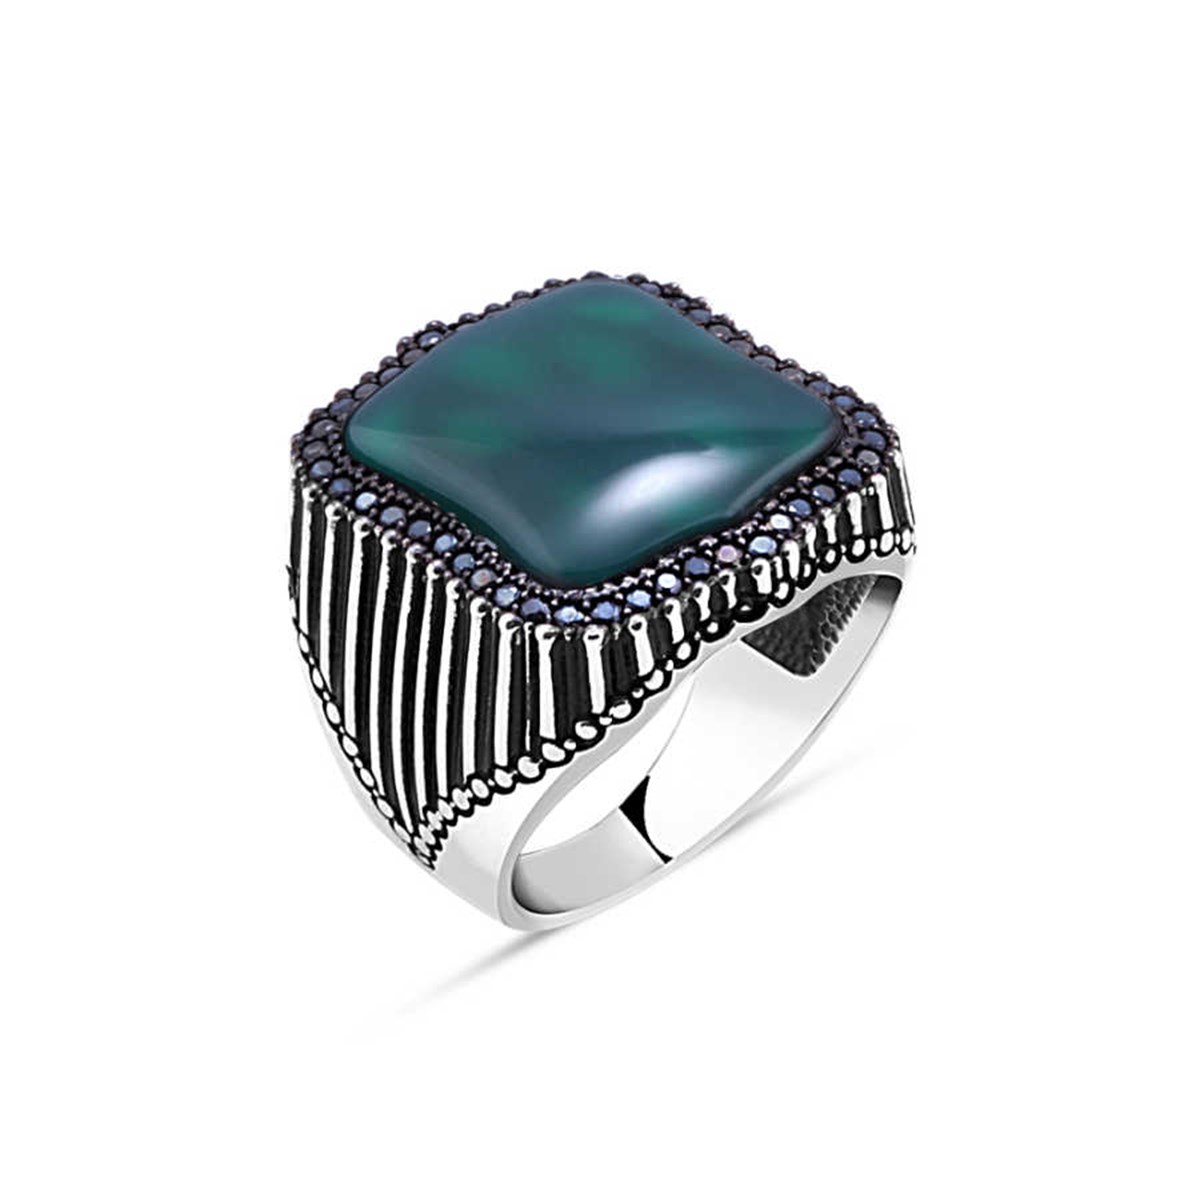 Sterling Silver Men's Ring with Tiny Black Zircon Stone on the Edge with Plain Green Agate Stone in the Middle